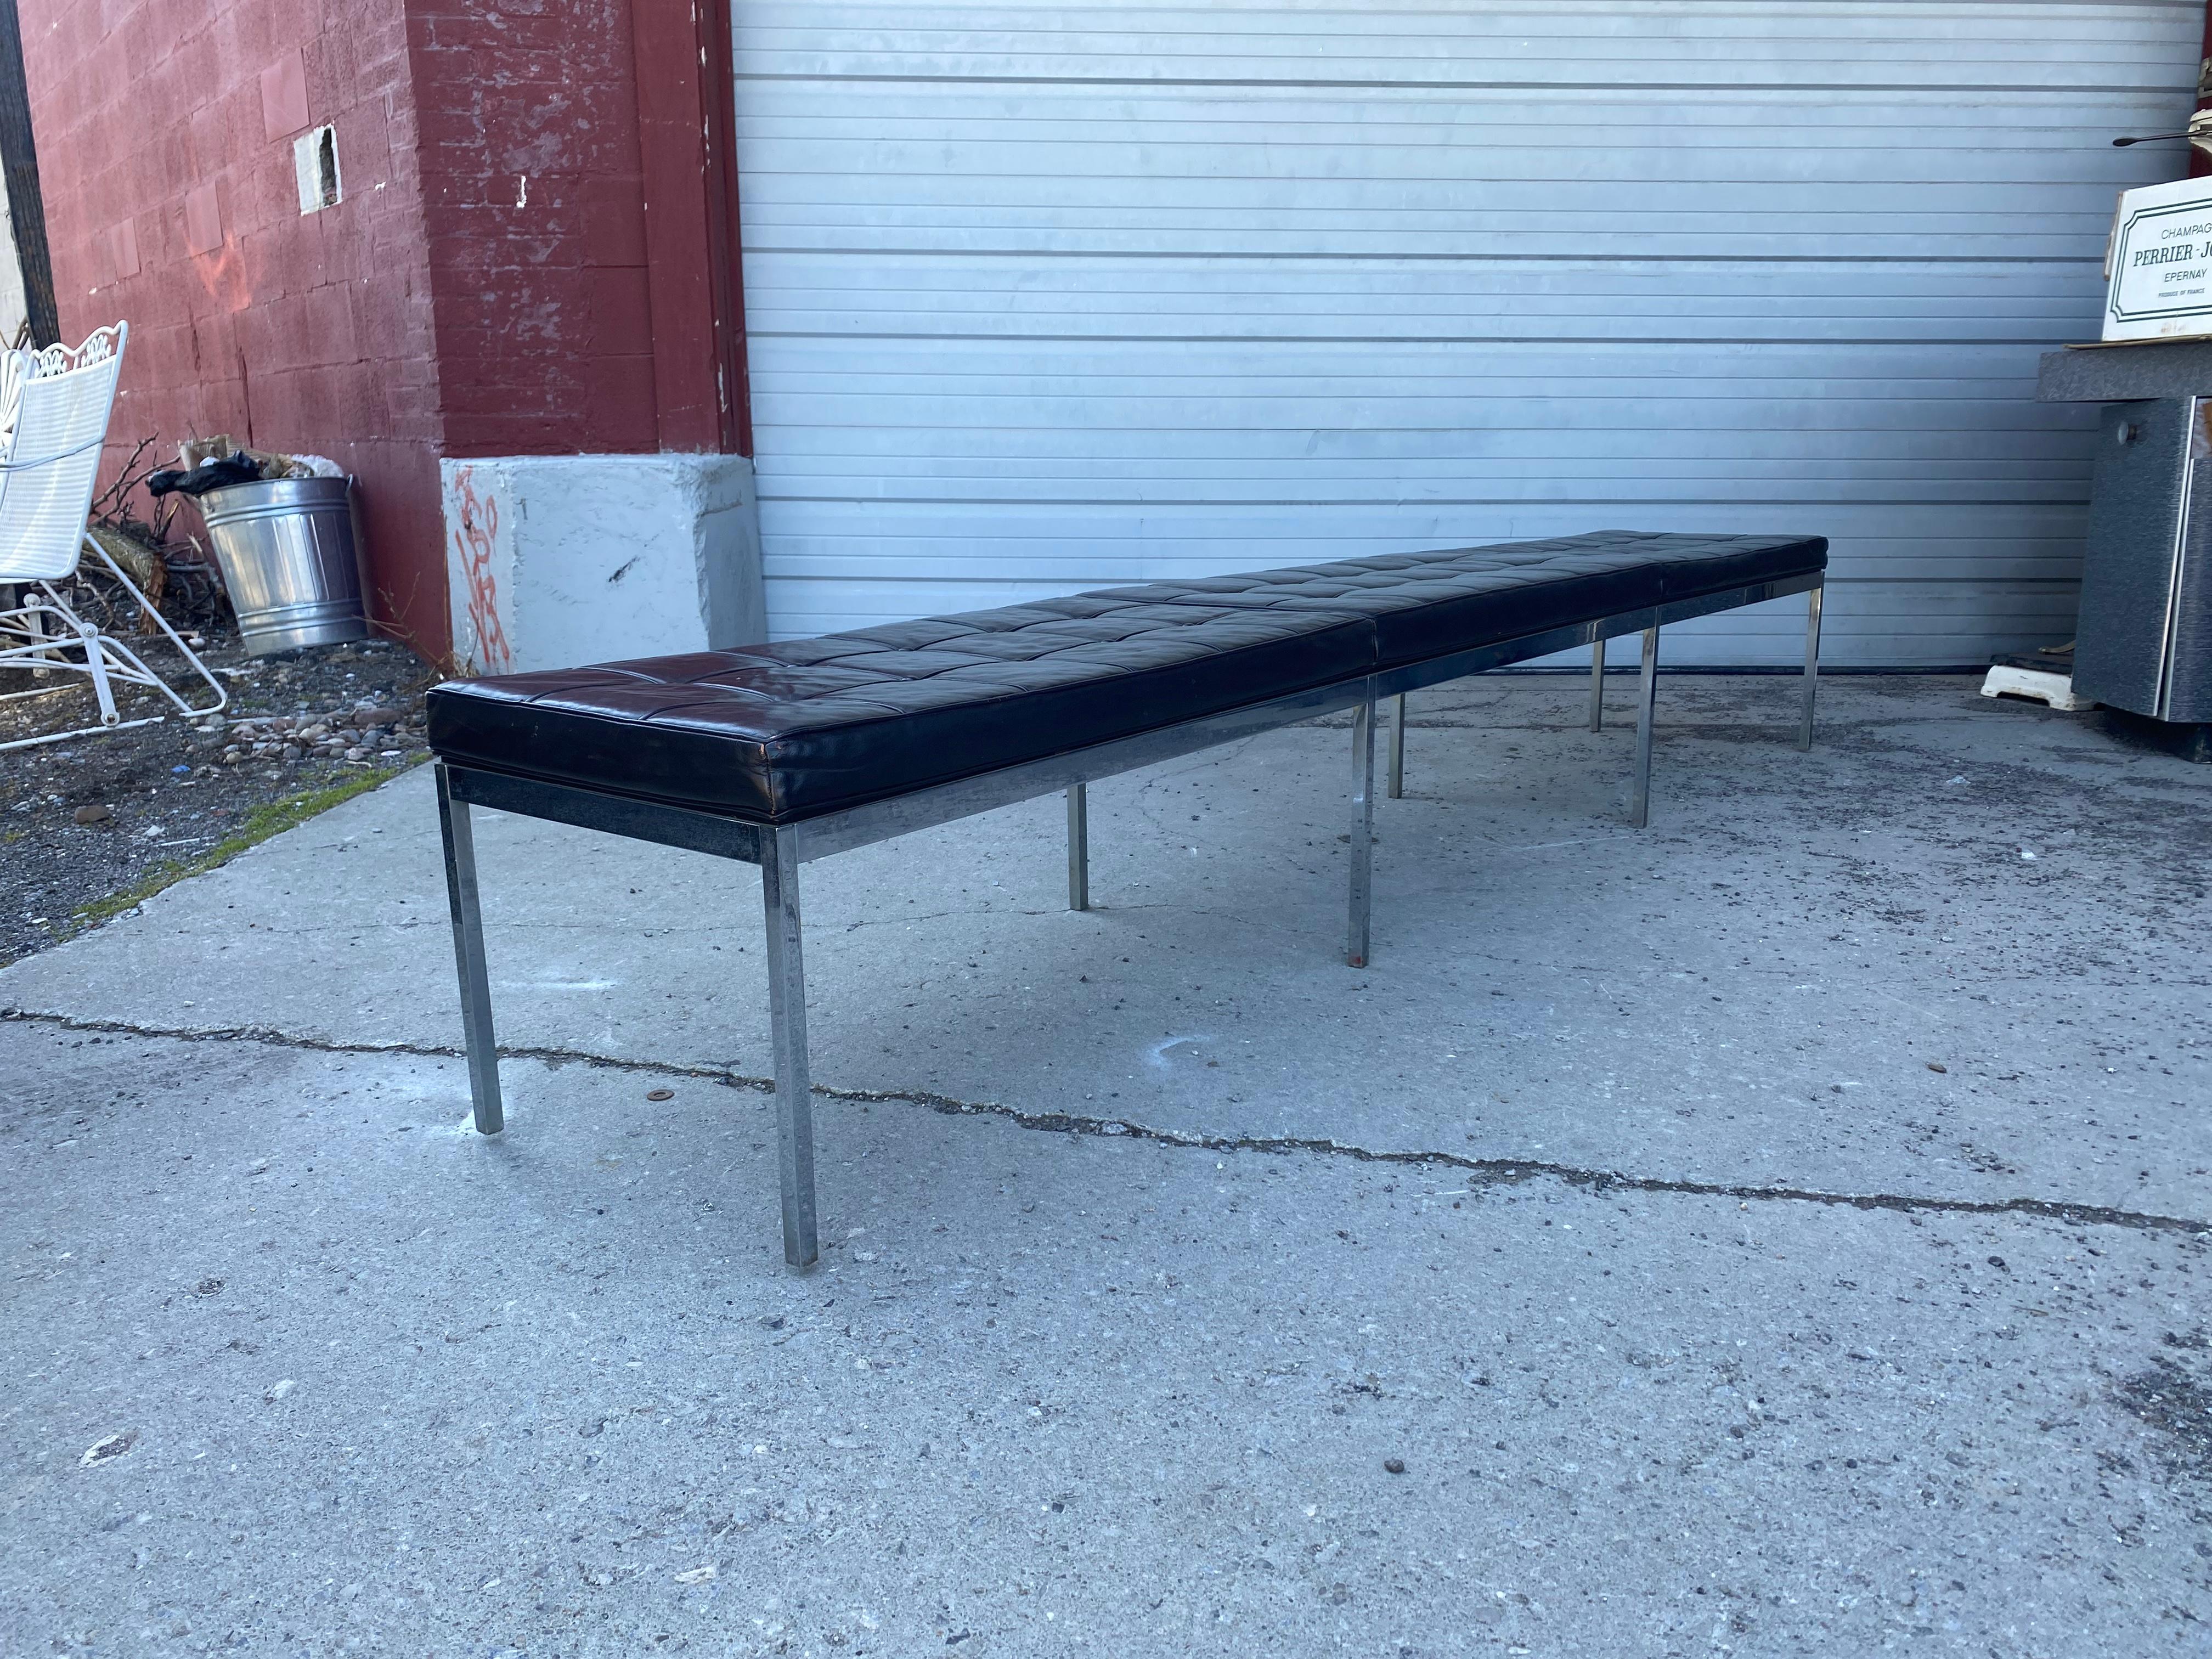 Rare 9 Foot Tufted Leather and Chrome bench by Florence Knoll for Knoll.. Salvaged from Albright Knox aRT gALLERY,,,Buffalo NY..Most likely a custom order from Knoll.,,,have never seen one this length.Hand delivery avail to New York City or anywhere